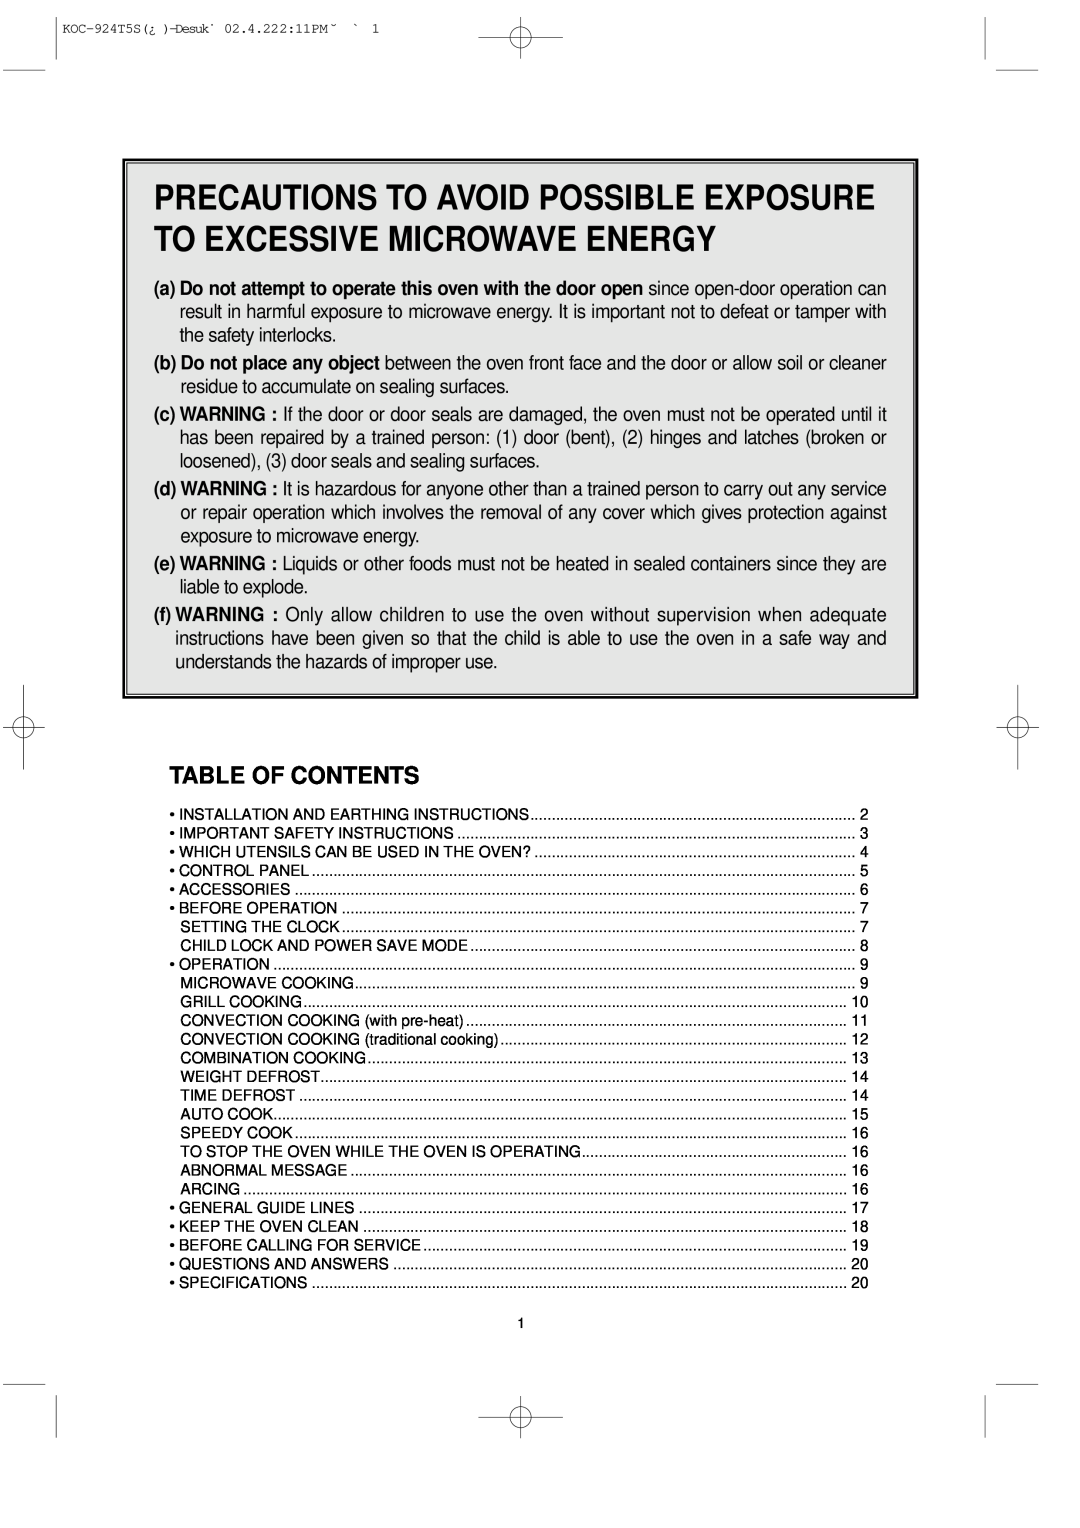 Daewoo KOC-924T owner manual Precautions To Avoid Possible Exposure To Excessive Microwave Energy, Table Of Contents 